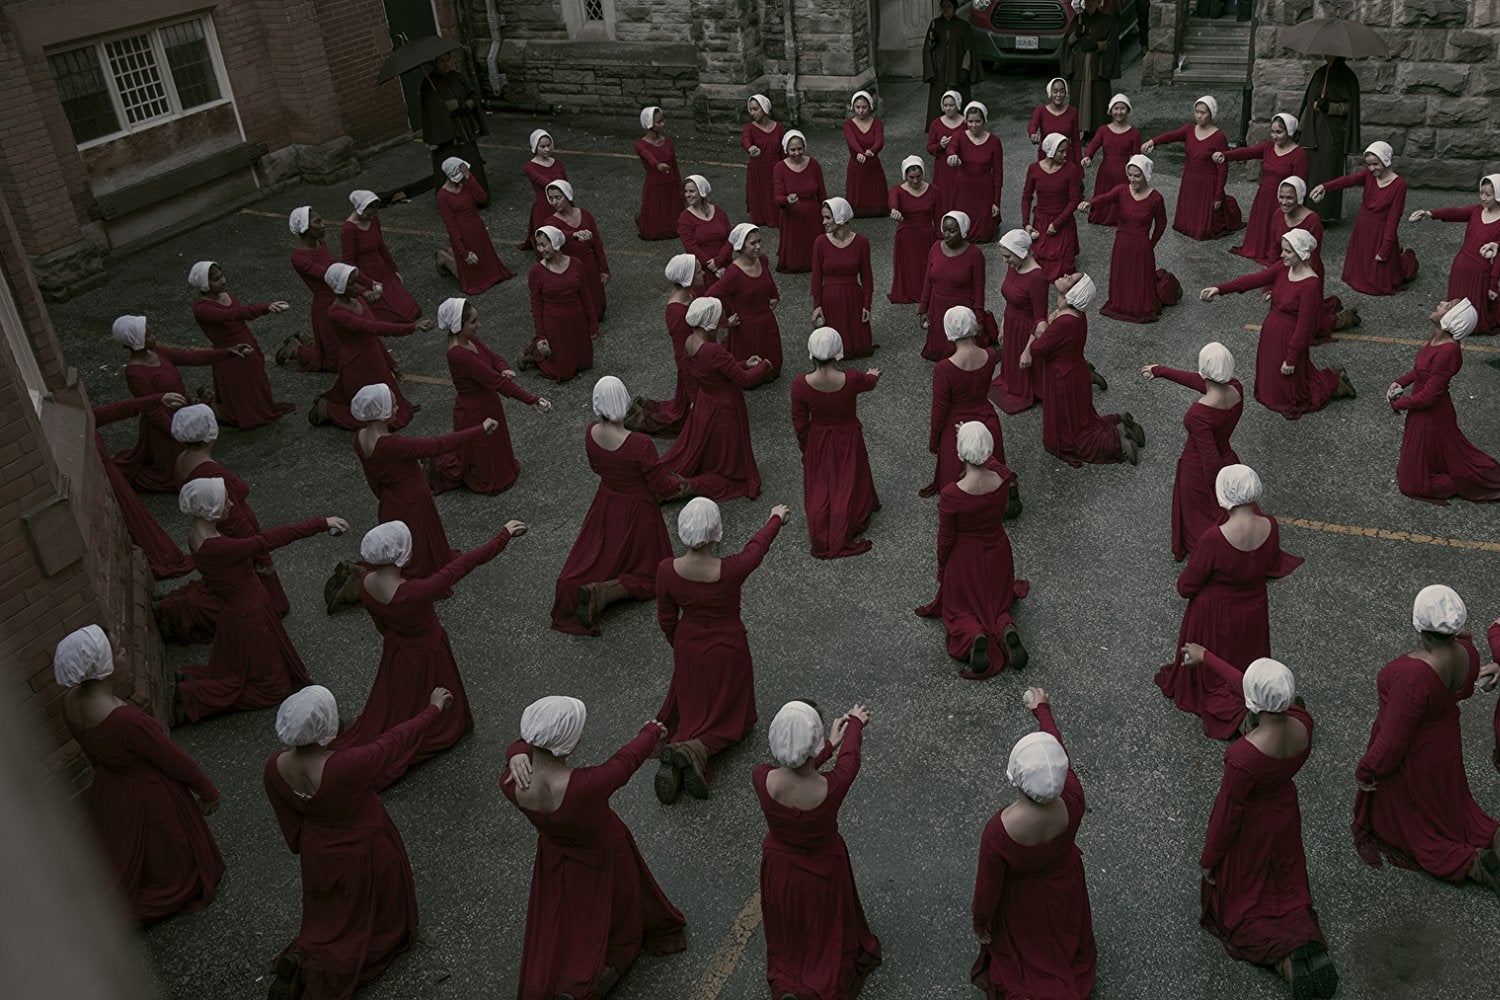 View from above: Women wearing red robes and white bonnets kneel in concentric circles, each with one arm outstretched.